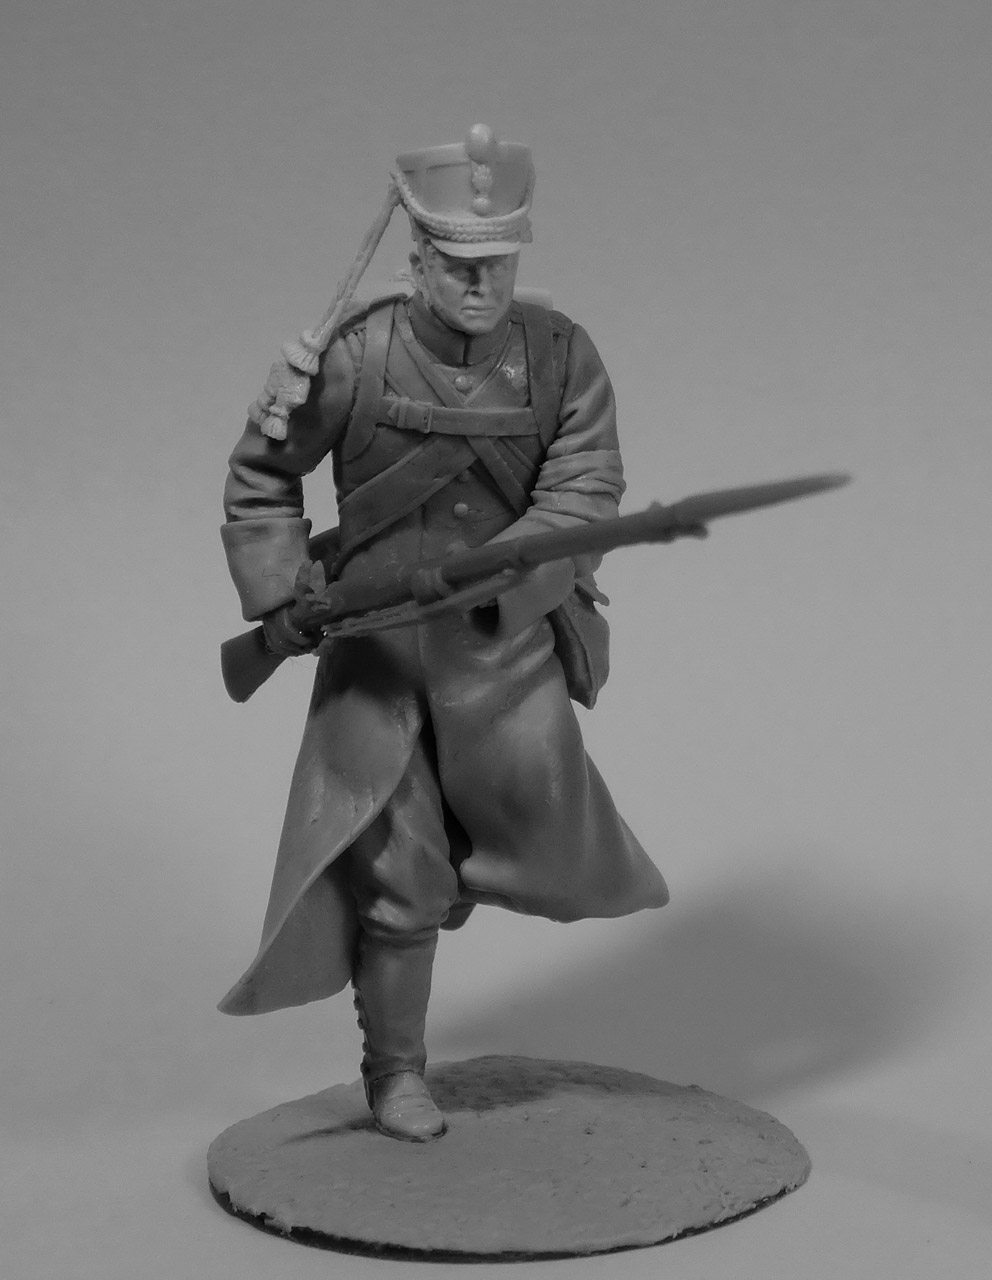 Sculpture: Private, 19th chasseurs, in winter uniform, March 1814, photo #7